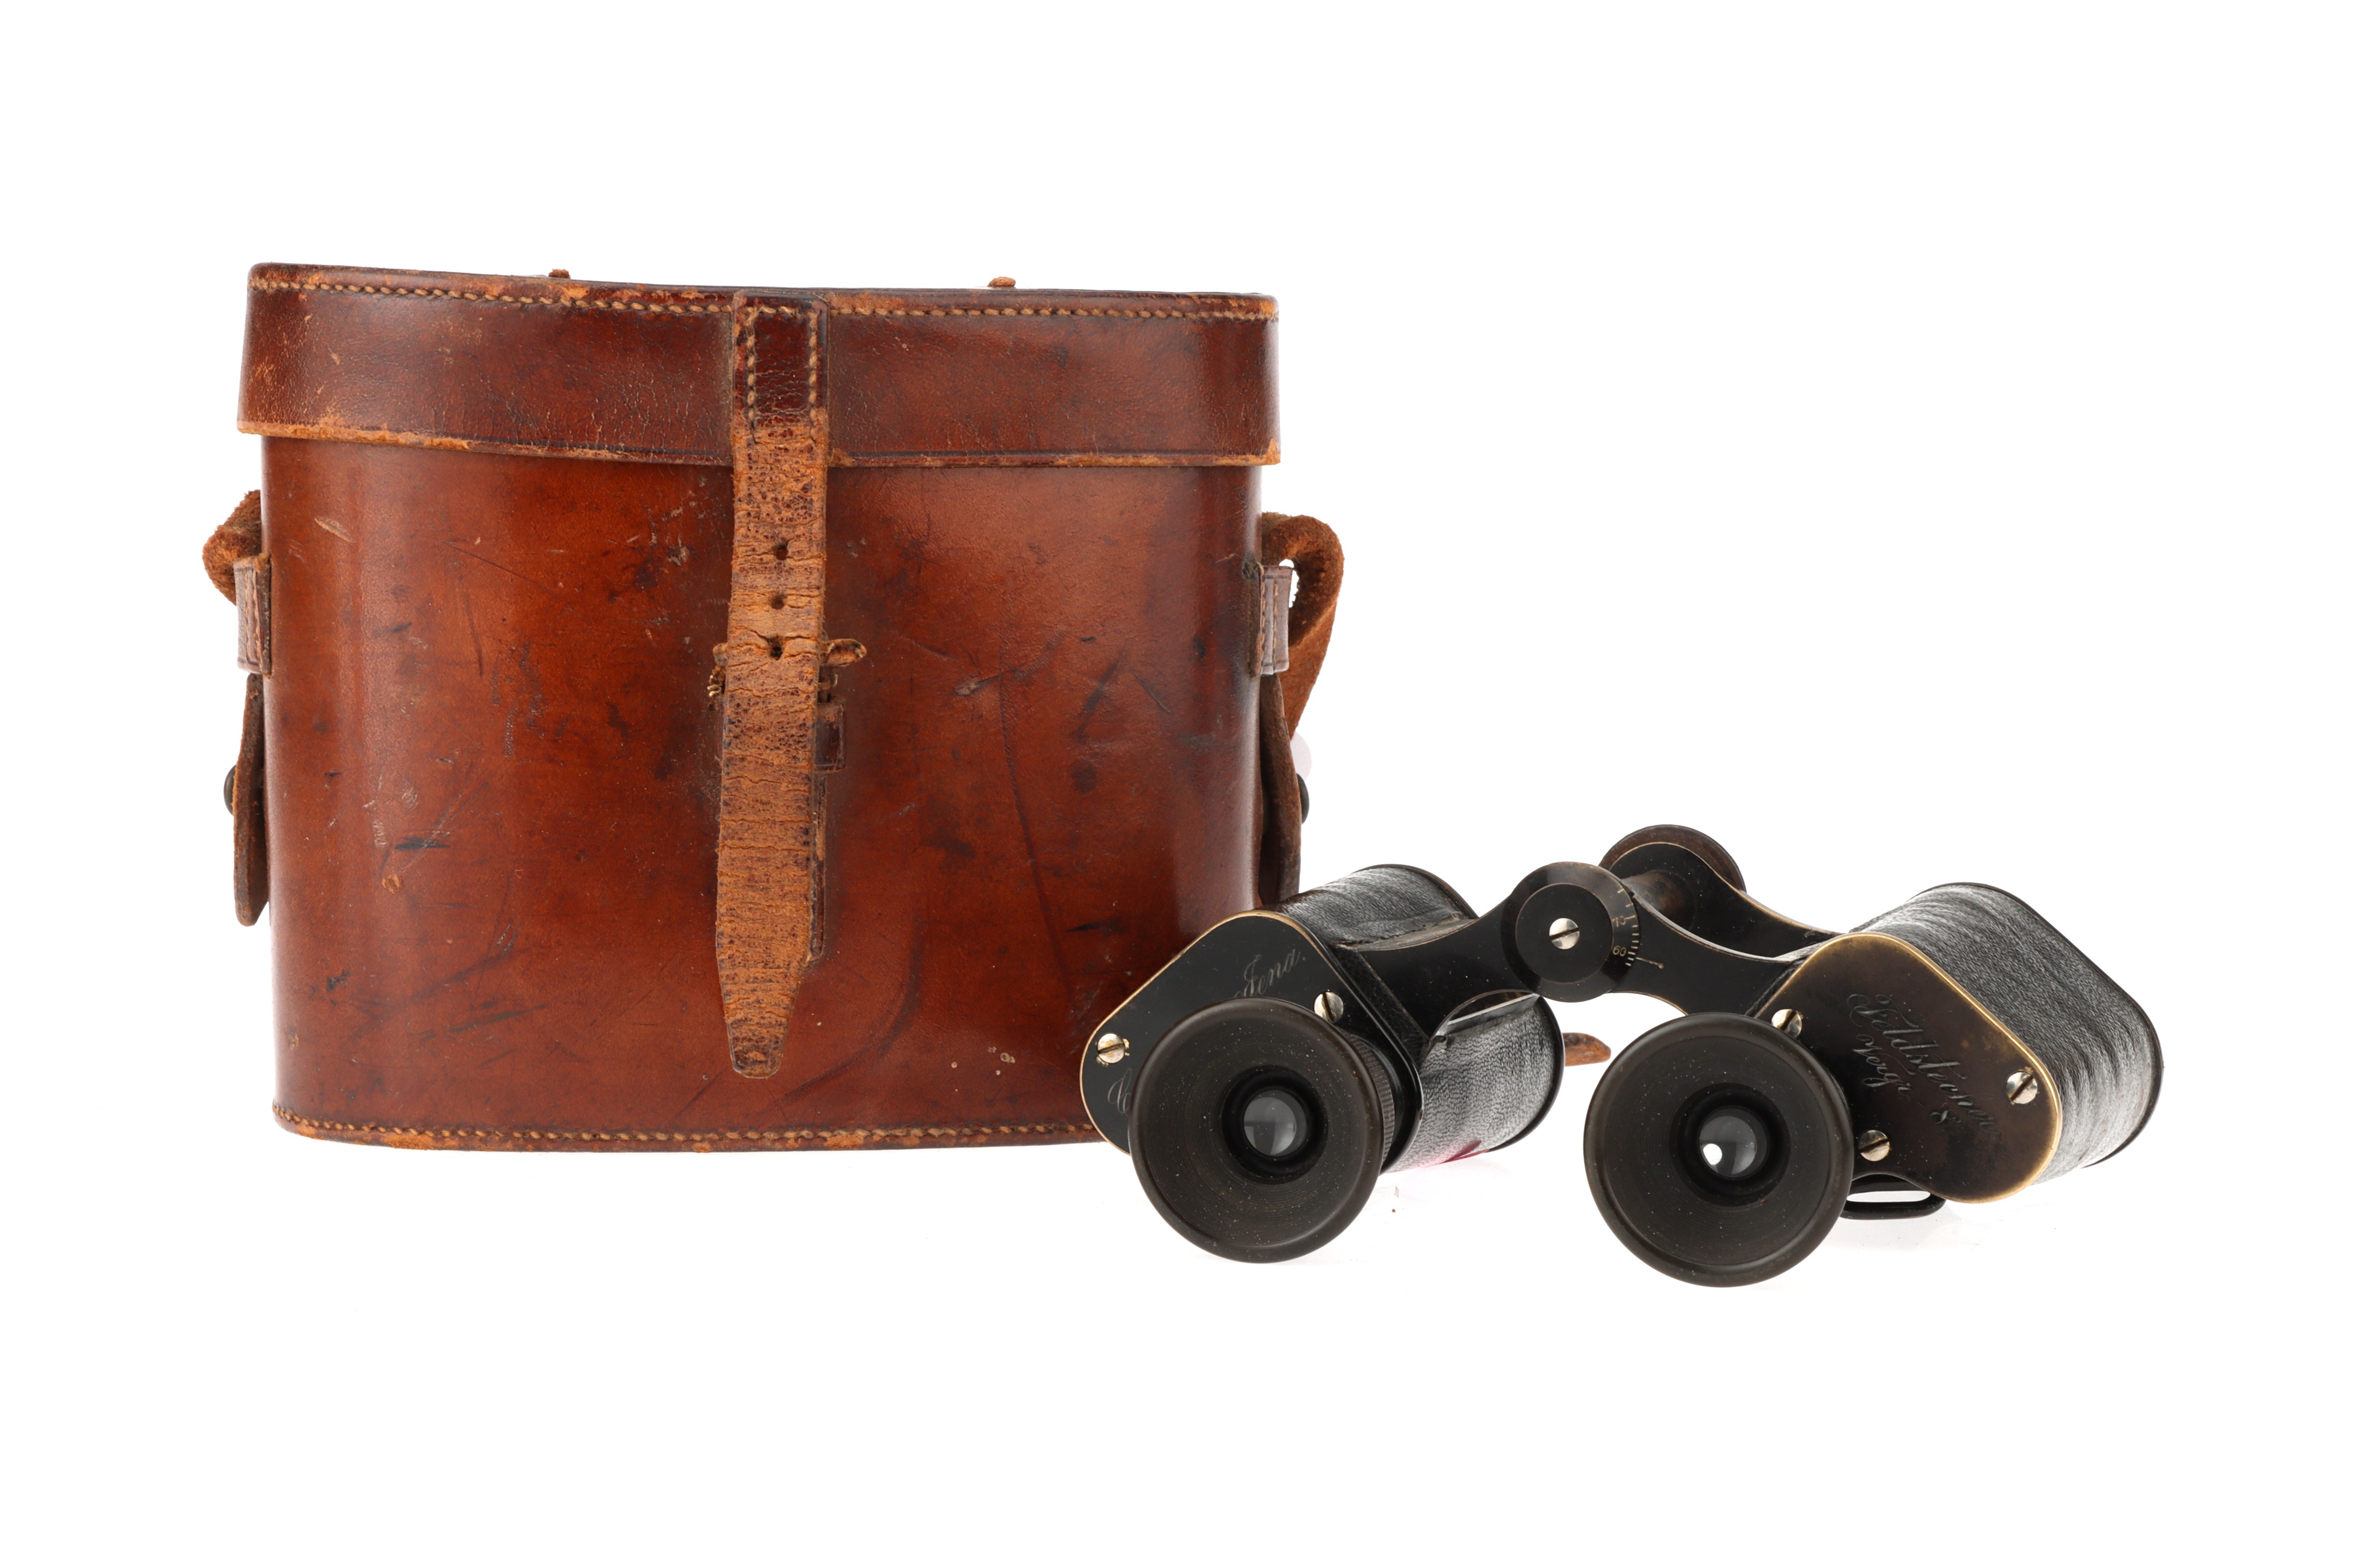 An Early Set of Binoculars By Zeiss - Image 3 of 6